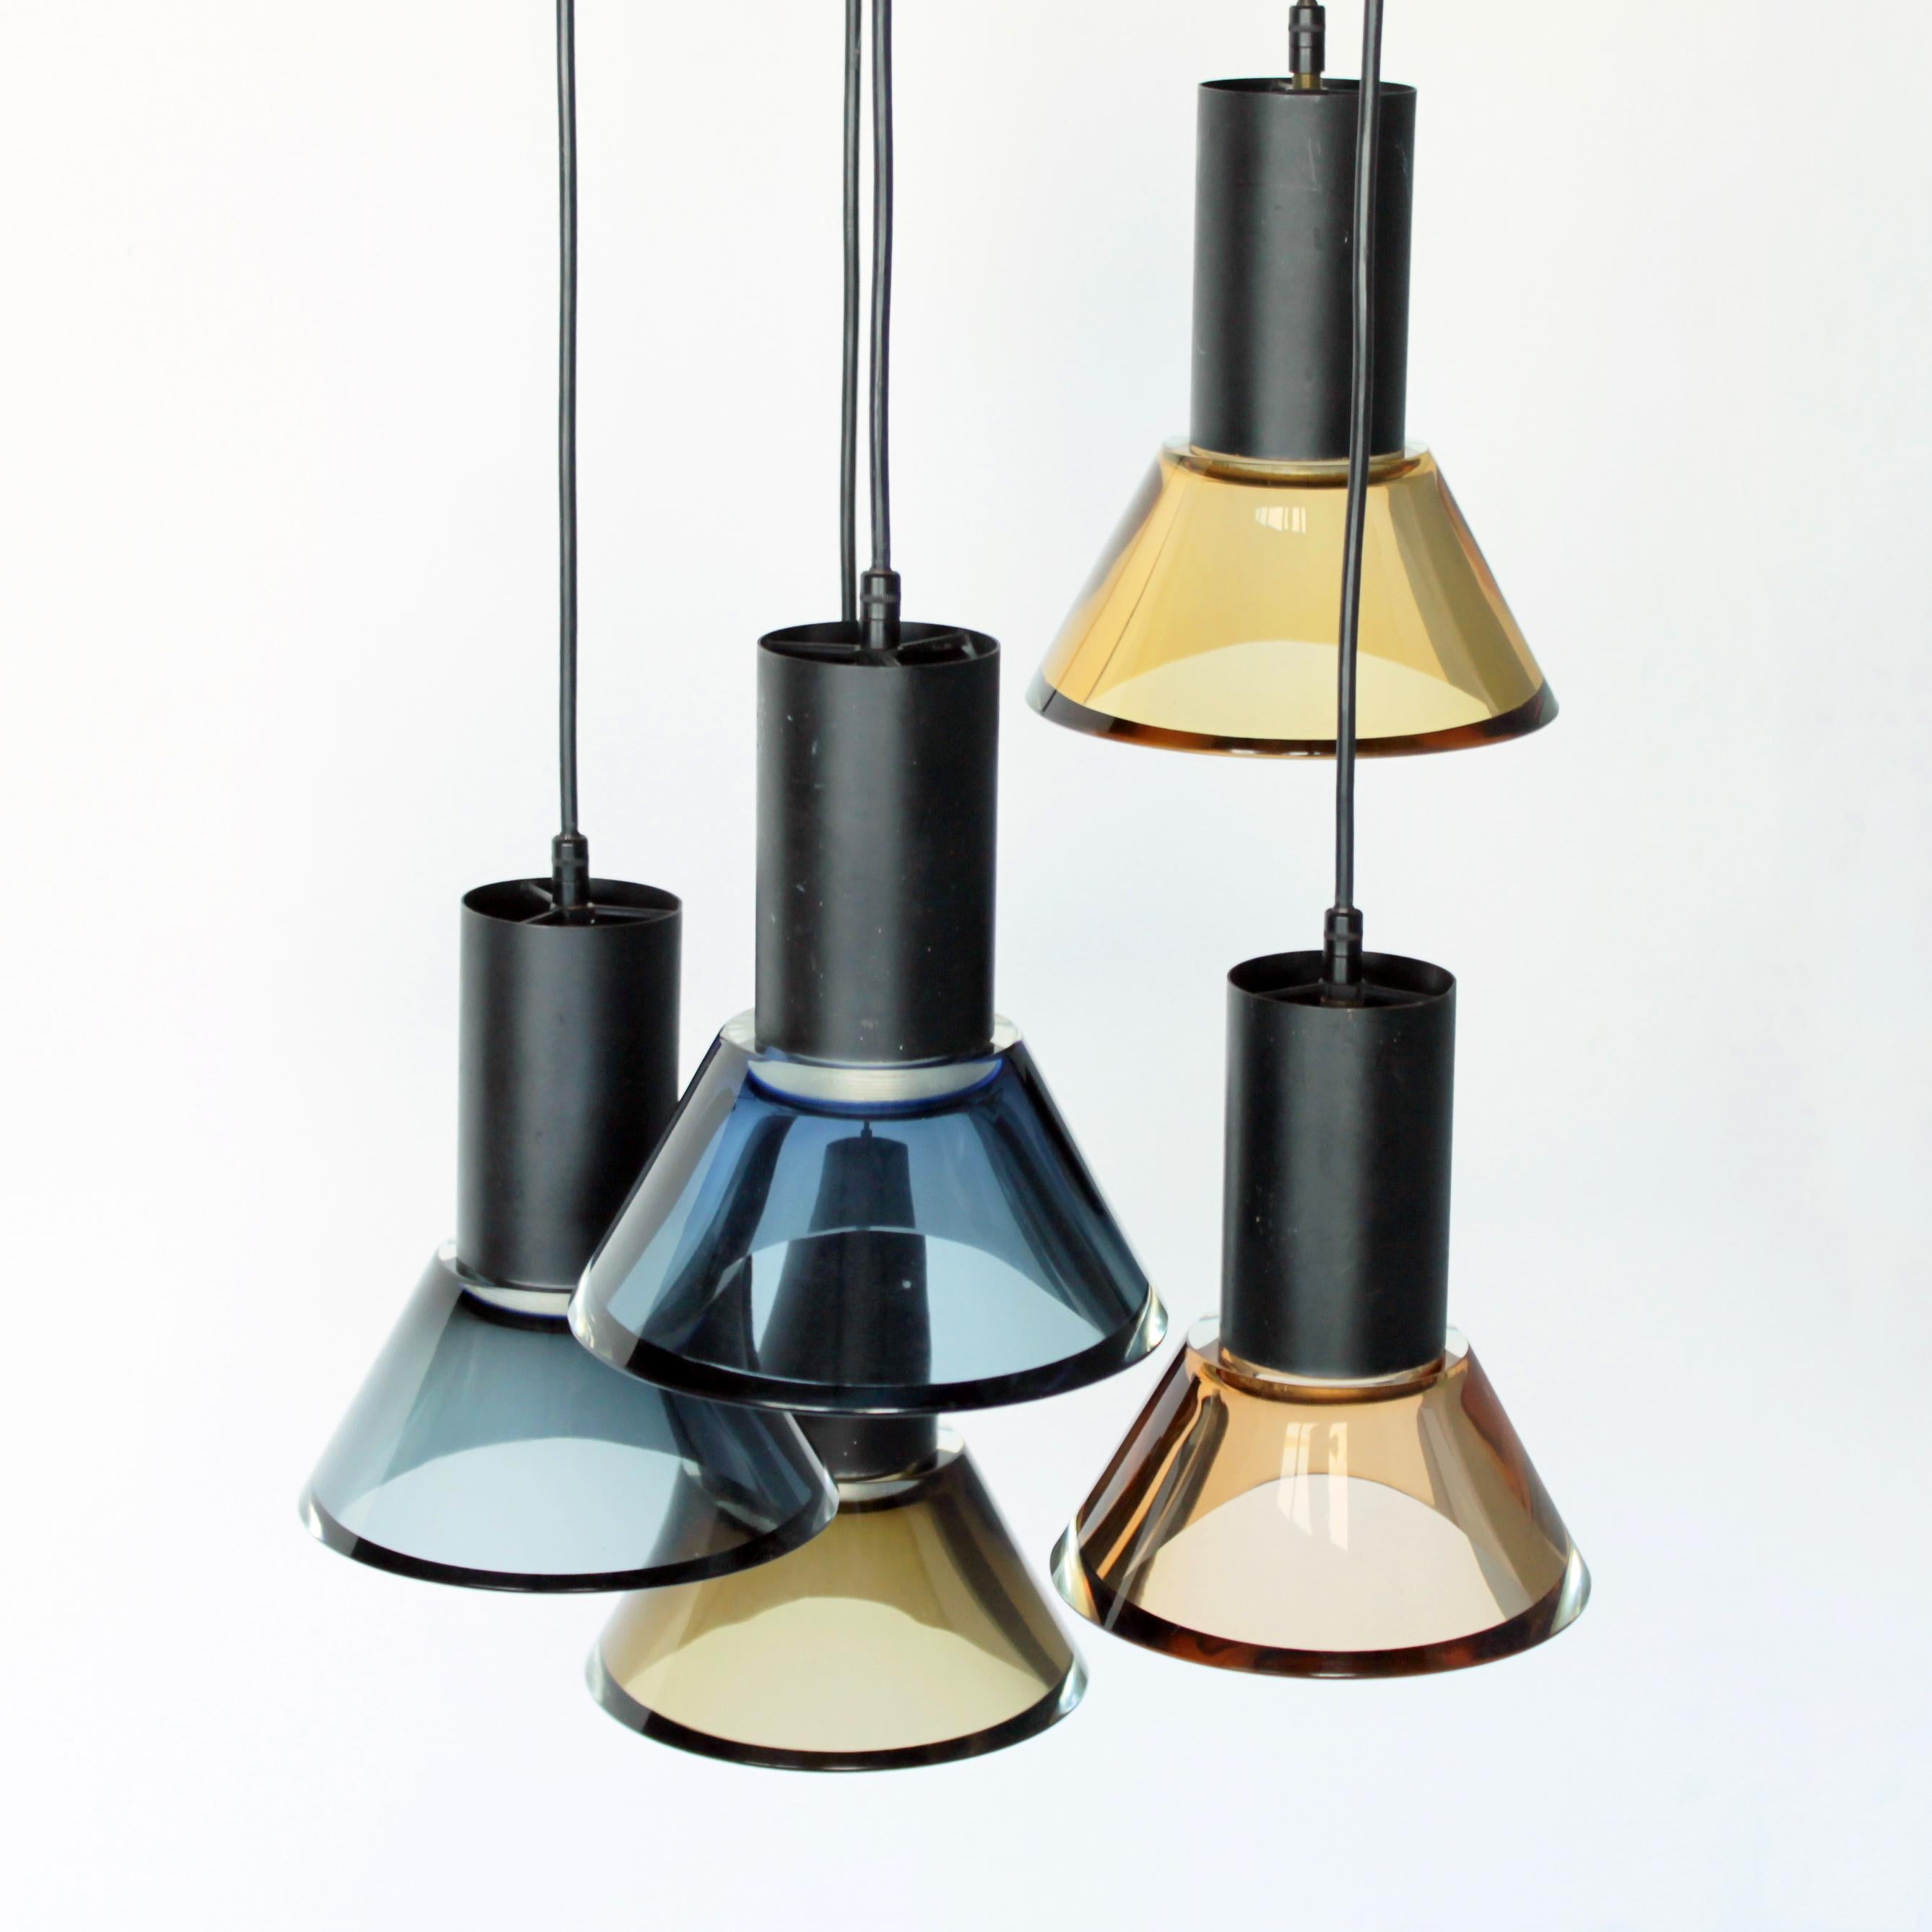 Five Murano glass fixture by Flavio Poli for Seguso Vetri d'Arte, Murano, Venice Italy. Brass fixture and solid glass in stunning subtle colors, from yellow till blue.
Total length a light (metal cylinder with the glass): 7.7 in. (19,5 cm), height